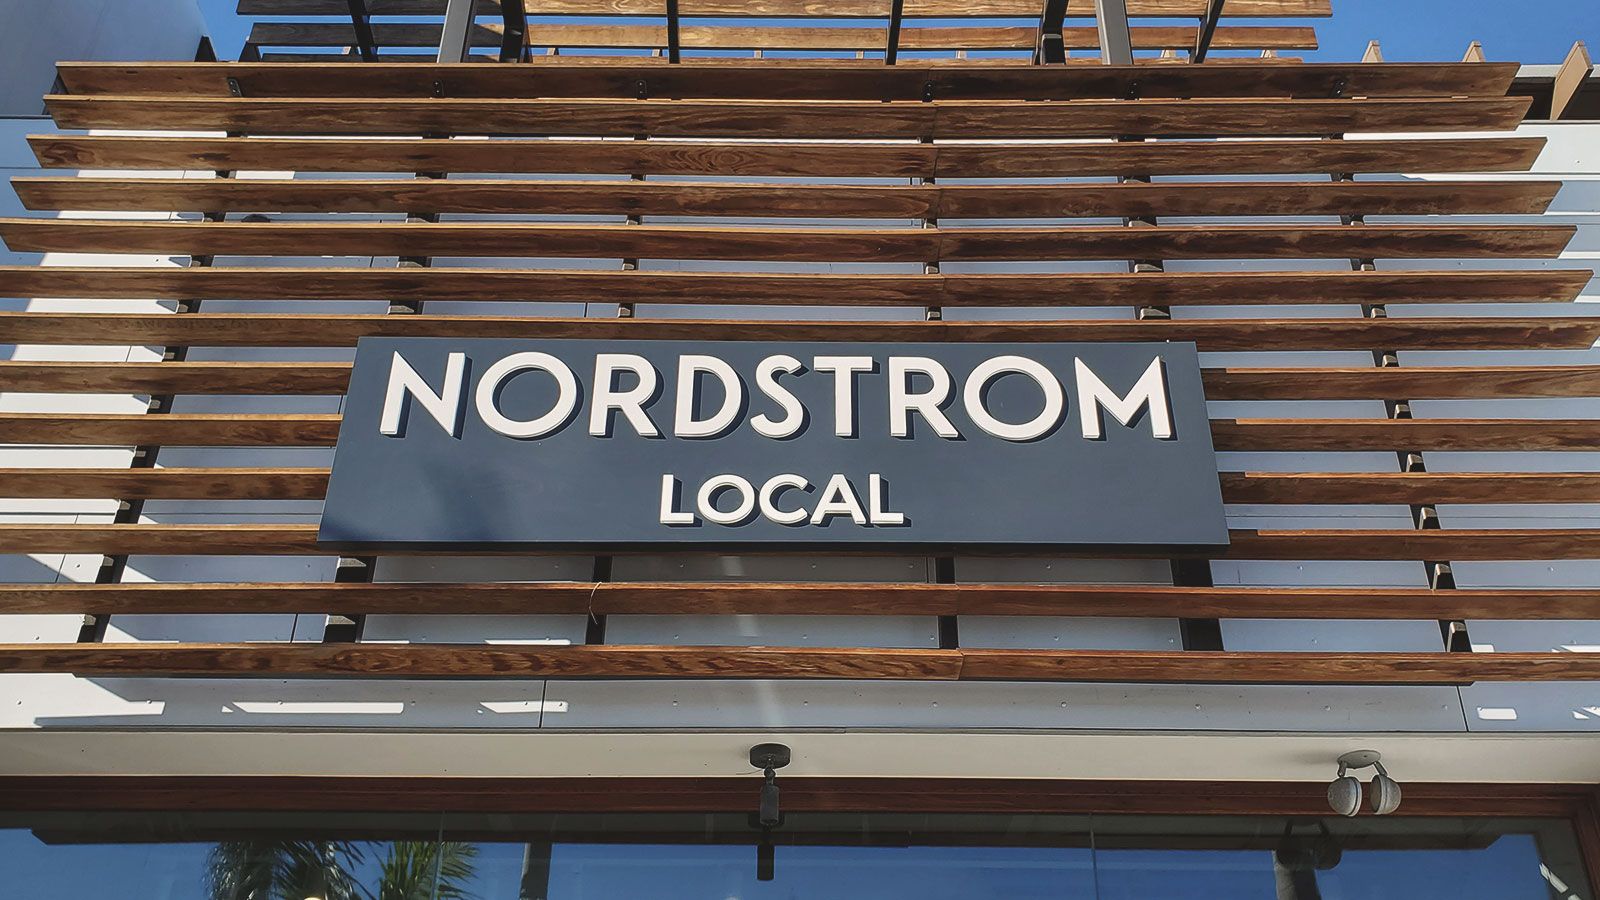 Nordstrom outdoor business sign